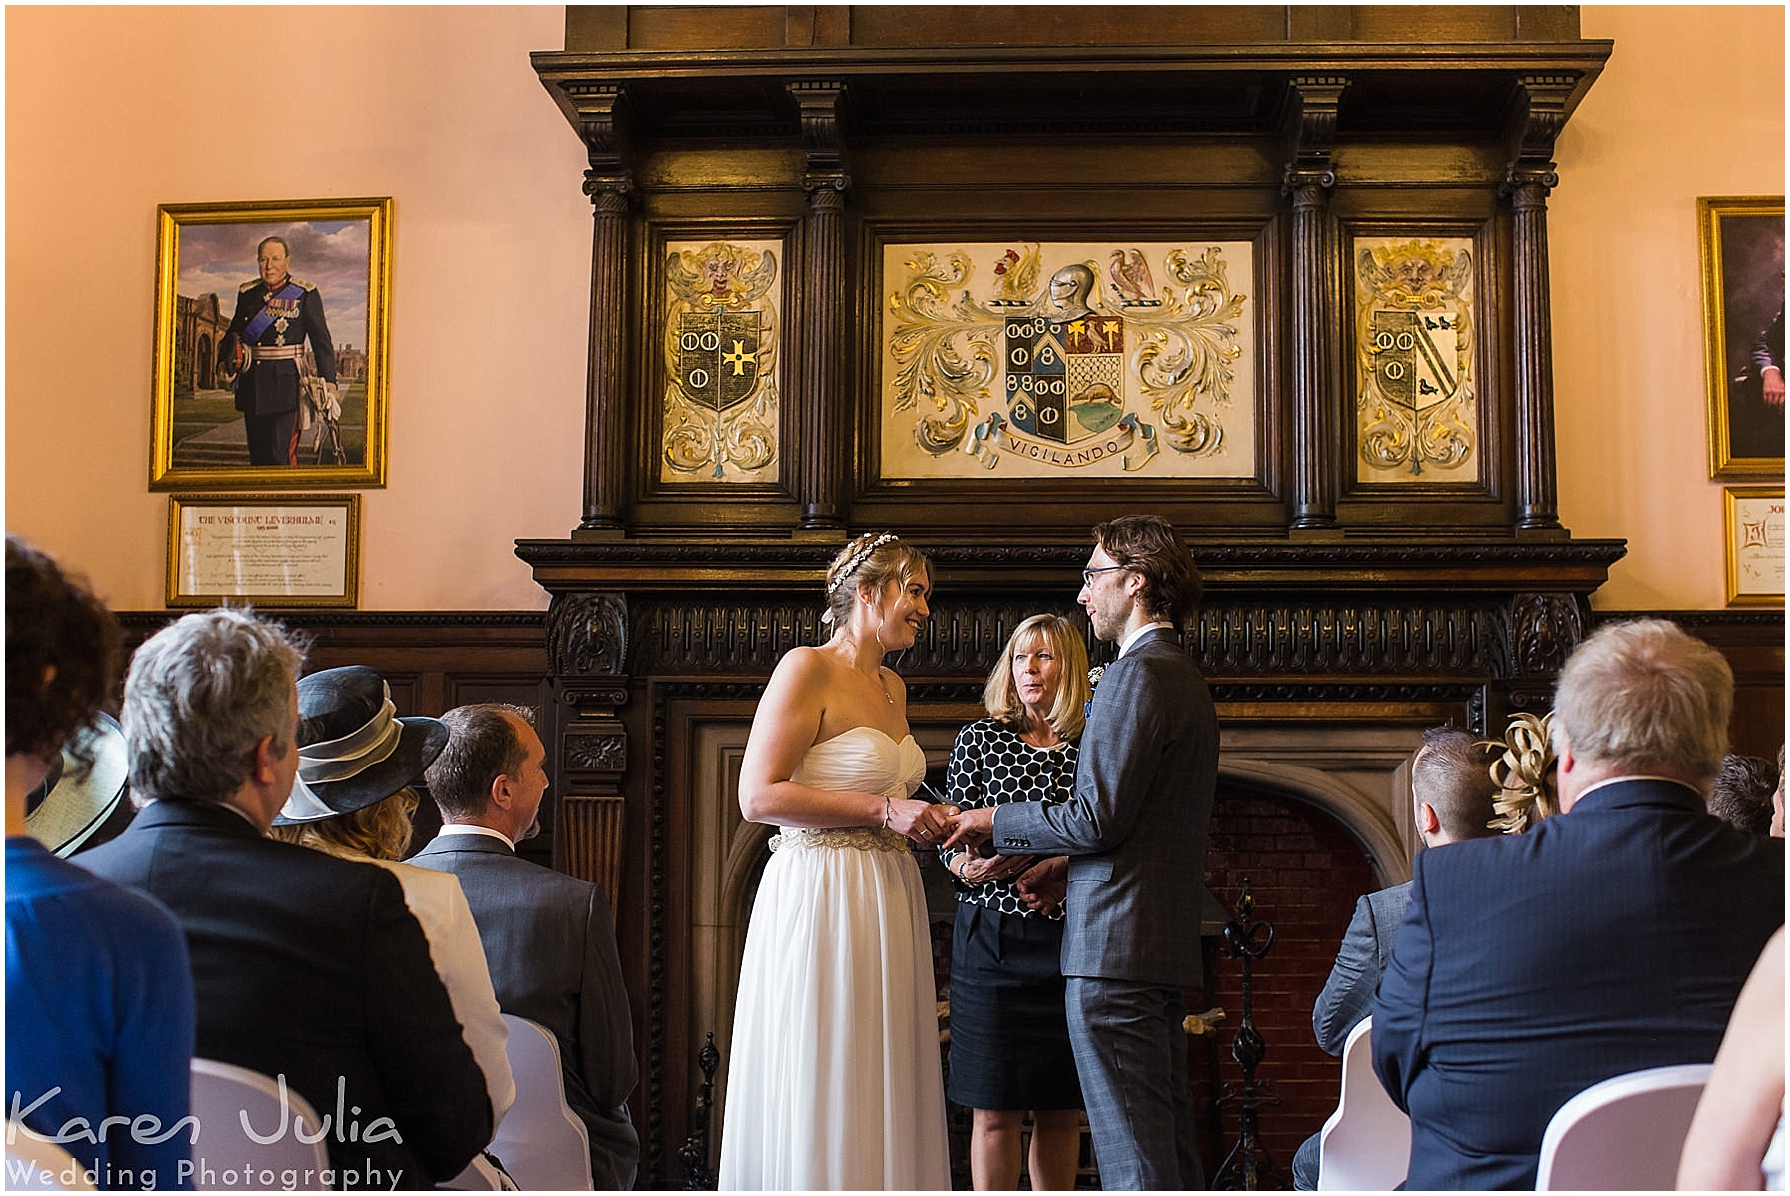 Reaseheath Hall wedding ceremony with bride and groom exchanging rings